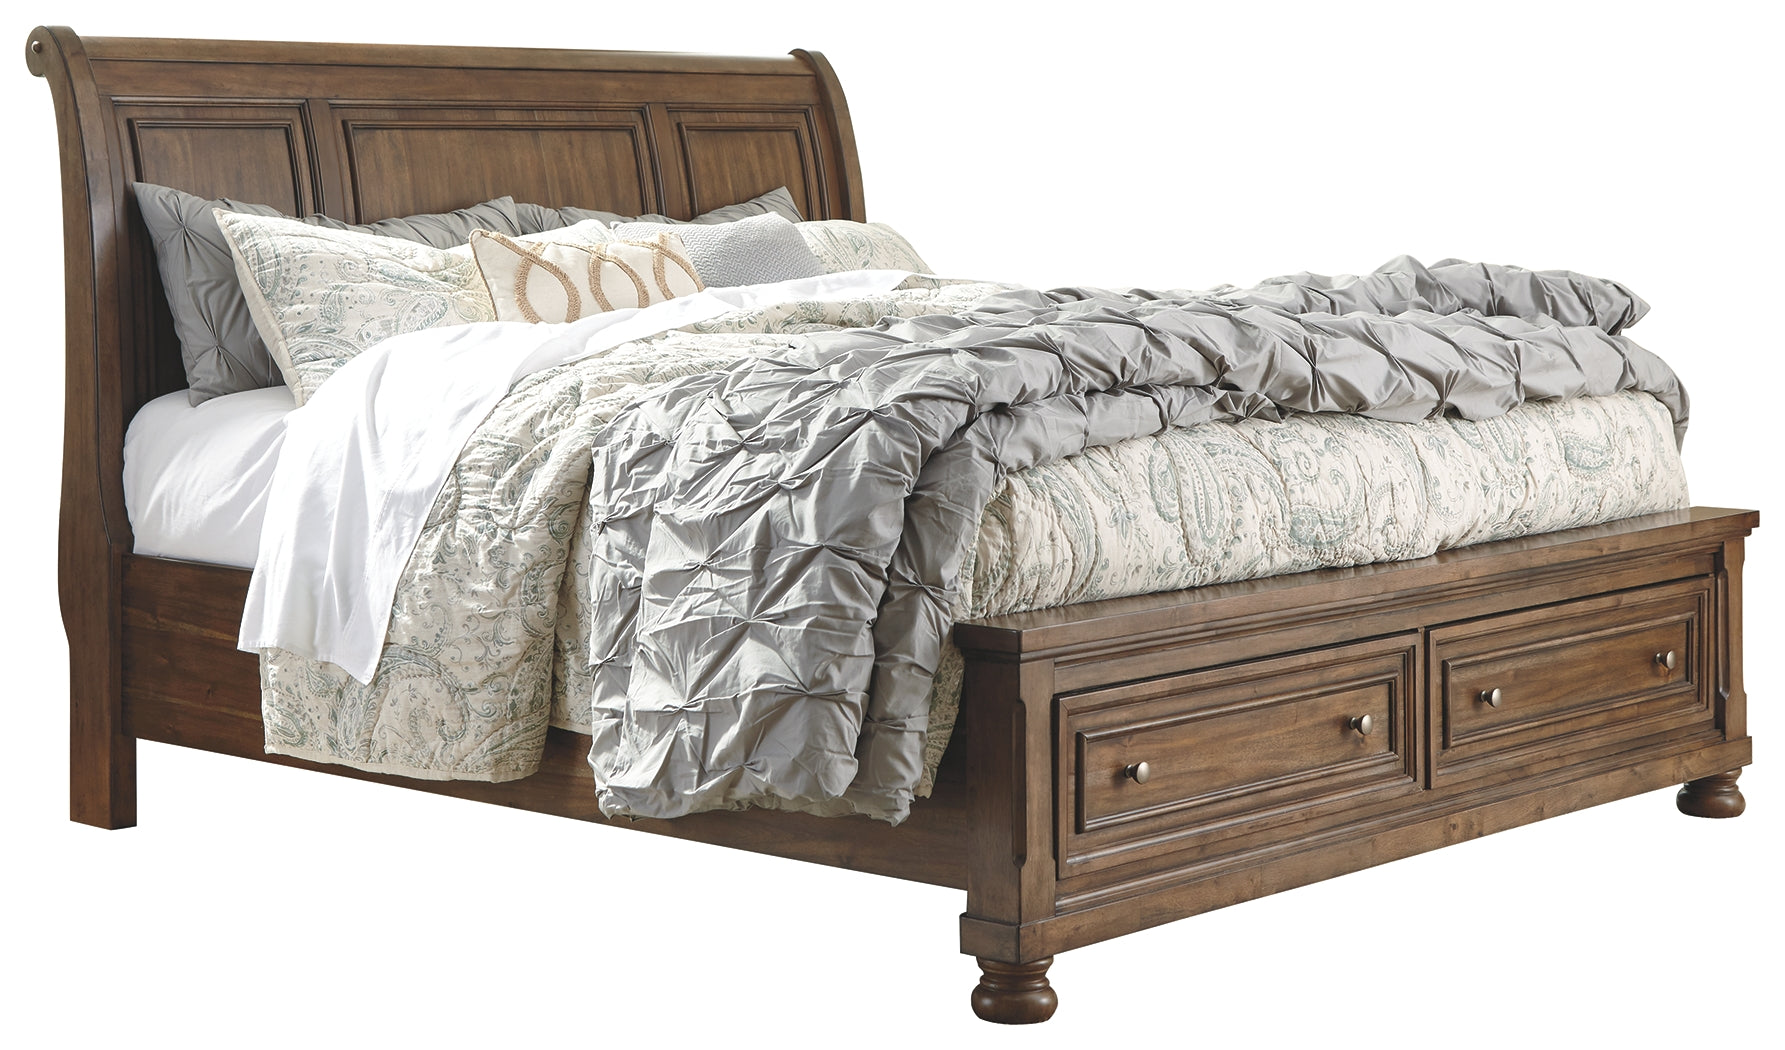 Signature Design by Ashley Flynnter California King Sleigh Bed with 2 Storage Drawers